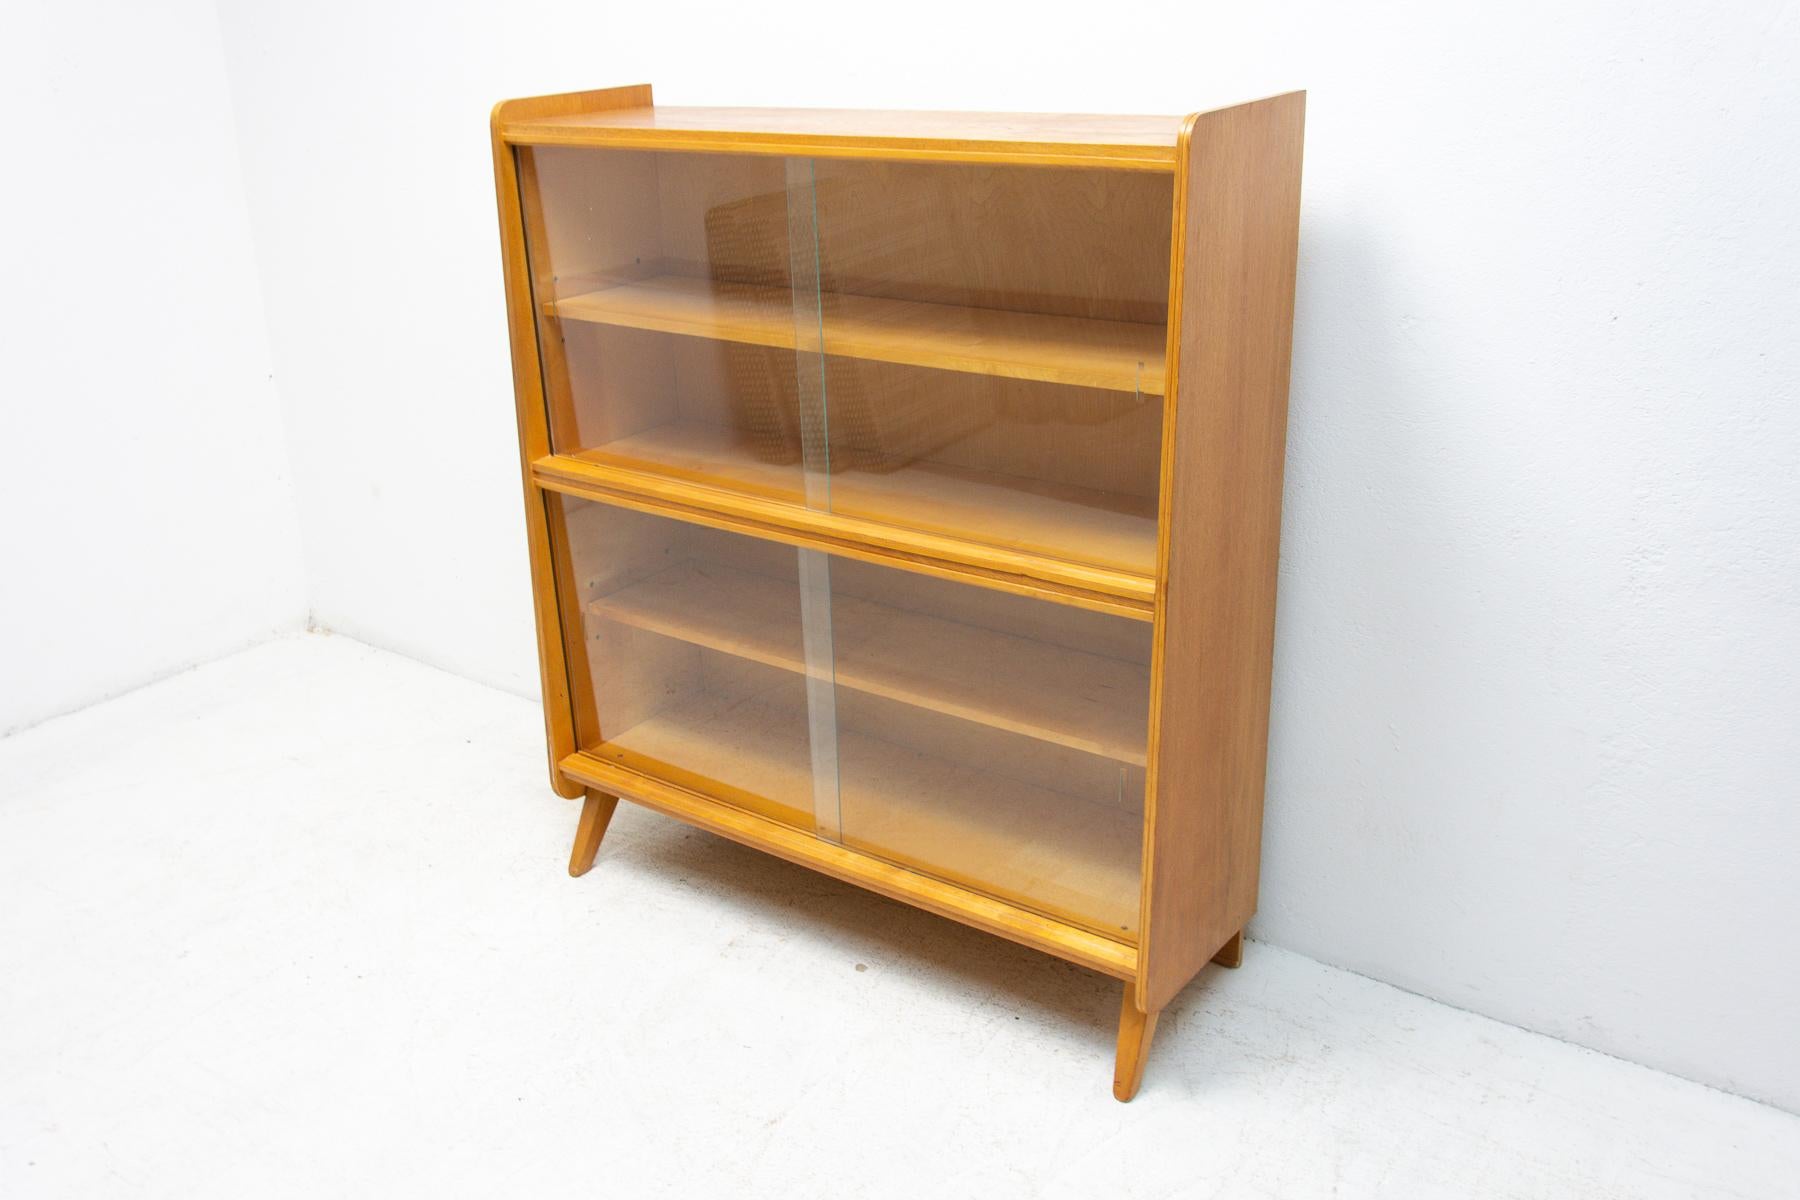 Mid century vintage bookcase from the 1960’s. It was designed by František Jirák and was manufactured by Nový Domov company in the former Czechoslovakia. Features a simple design, a glazed section with five storage spaces. In good Vintage condition,